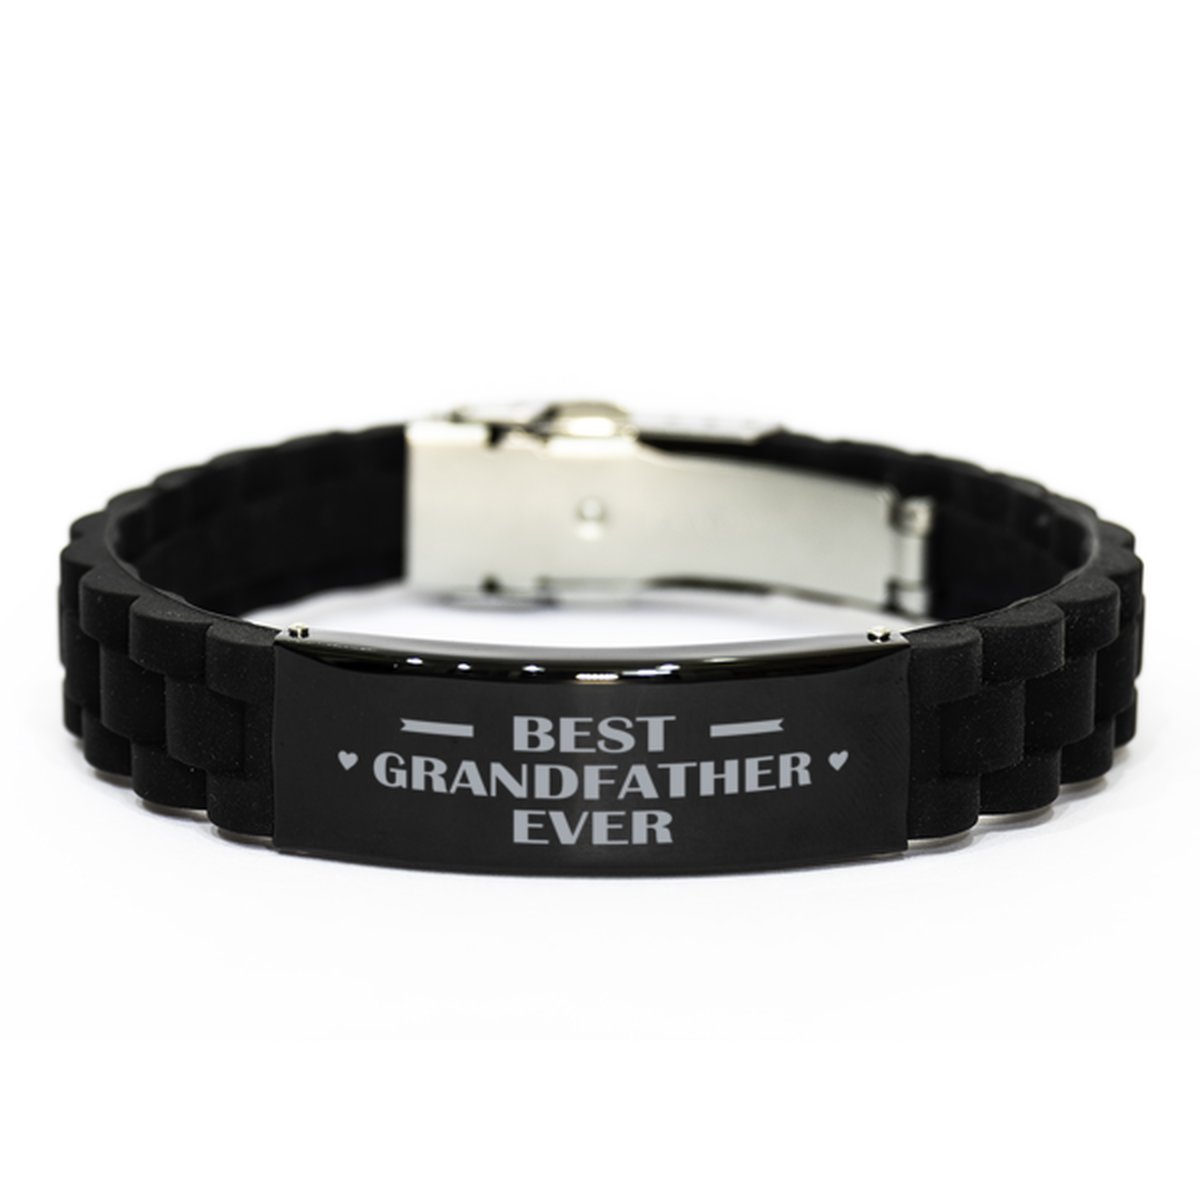 Best Grandfather Ever Grandfather Gifts, Funny Black Engraved Bracelet For Grandfather, Family Gifts For Men